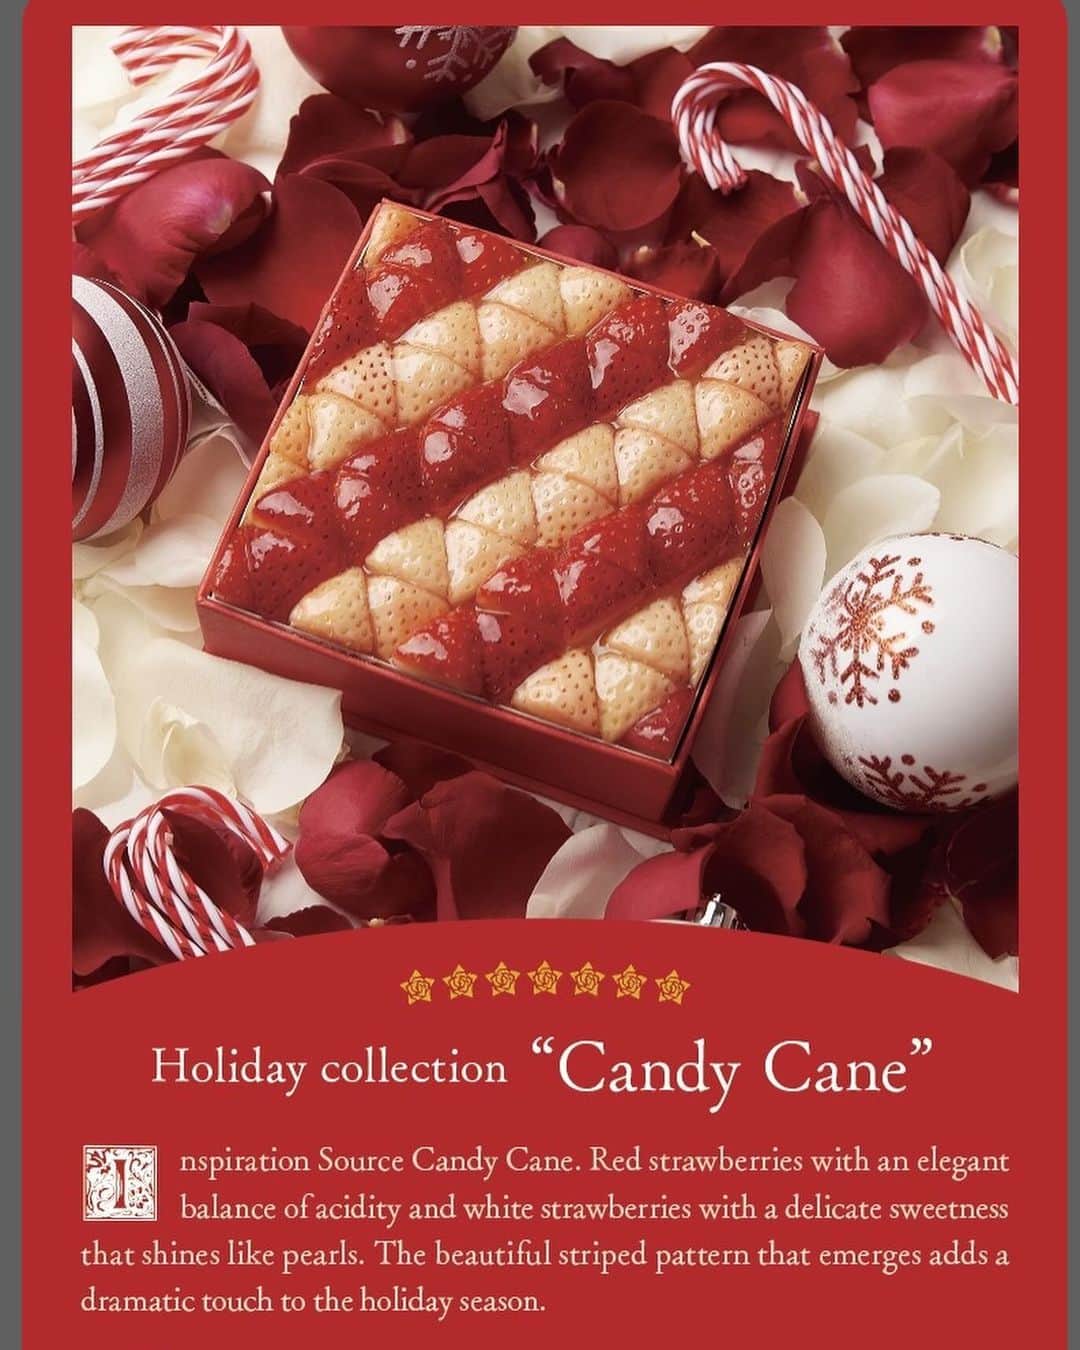 庄司夏子さんのインスタグラム写真 - (庄司夏子Instagram)「Été Holiday Season collection   “Candy Cane”  This Inspiration Source comes from “Candy Cane”. Red strawberries with an elegant balance of acidity and white strawberries with a delicate sweetness that shines like pearls. The flavors are layered with smooth strawberry and raspberry ganache collaboration with @valrhonafrance @valrhona_asia in the middle of layers and also strawberry sauces in the bottom will be the perfect harmony .  The beautiful striped pattern that emerges adds a dramatic touch to the holiday season.  Also included with the cake is an exclusive one  from the recently announced été trading card. The chef's childhood love of trading cards has finally given birth to été s one ,The story source of the dishes and cake collections are depicted on the cards, and these are rare cards in many ways that could be a surprise for something special events.  Holiday collection  “Candy Cane” インスピレーション ソースはキャンディケイン。 杖を意味するケイン。起源は羊を導くために使っていた杖が助け合いの心を象徴しています。 エレガンスな酸味のバランスの赤苺と、パールのように輝いて繊細な甘さを持つ白苺。フレーバーには苺と木苺の滑らかなガナッシュとコンフィチュールがおり重なり完璧なホリデーシーズンを彩ります。 また今回、ケーキとセットで先日発表されたété トレーディングカードのレアカードが付いてきます。わたしが幼少期から愛してやまないトレーディングカードからついにétéのトレカが生まれました。ケーキコレクションのストーリーソースが描かれており、このカードは今後étéからの特典だったり、サプライズだったり、イベントのインビテーションになりうるいろんな意味でのレアカードとなります。」12月7日 16時55分 - natsuko.ete